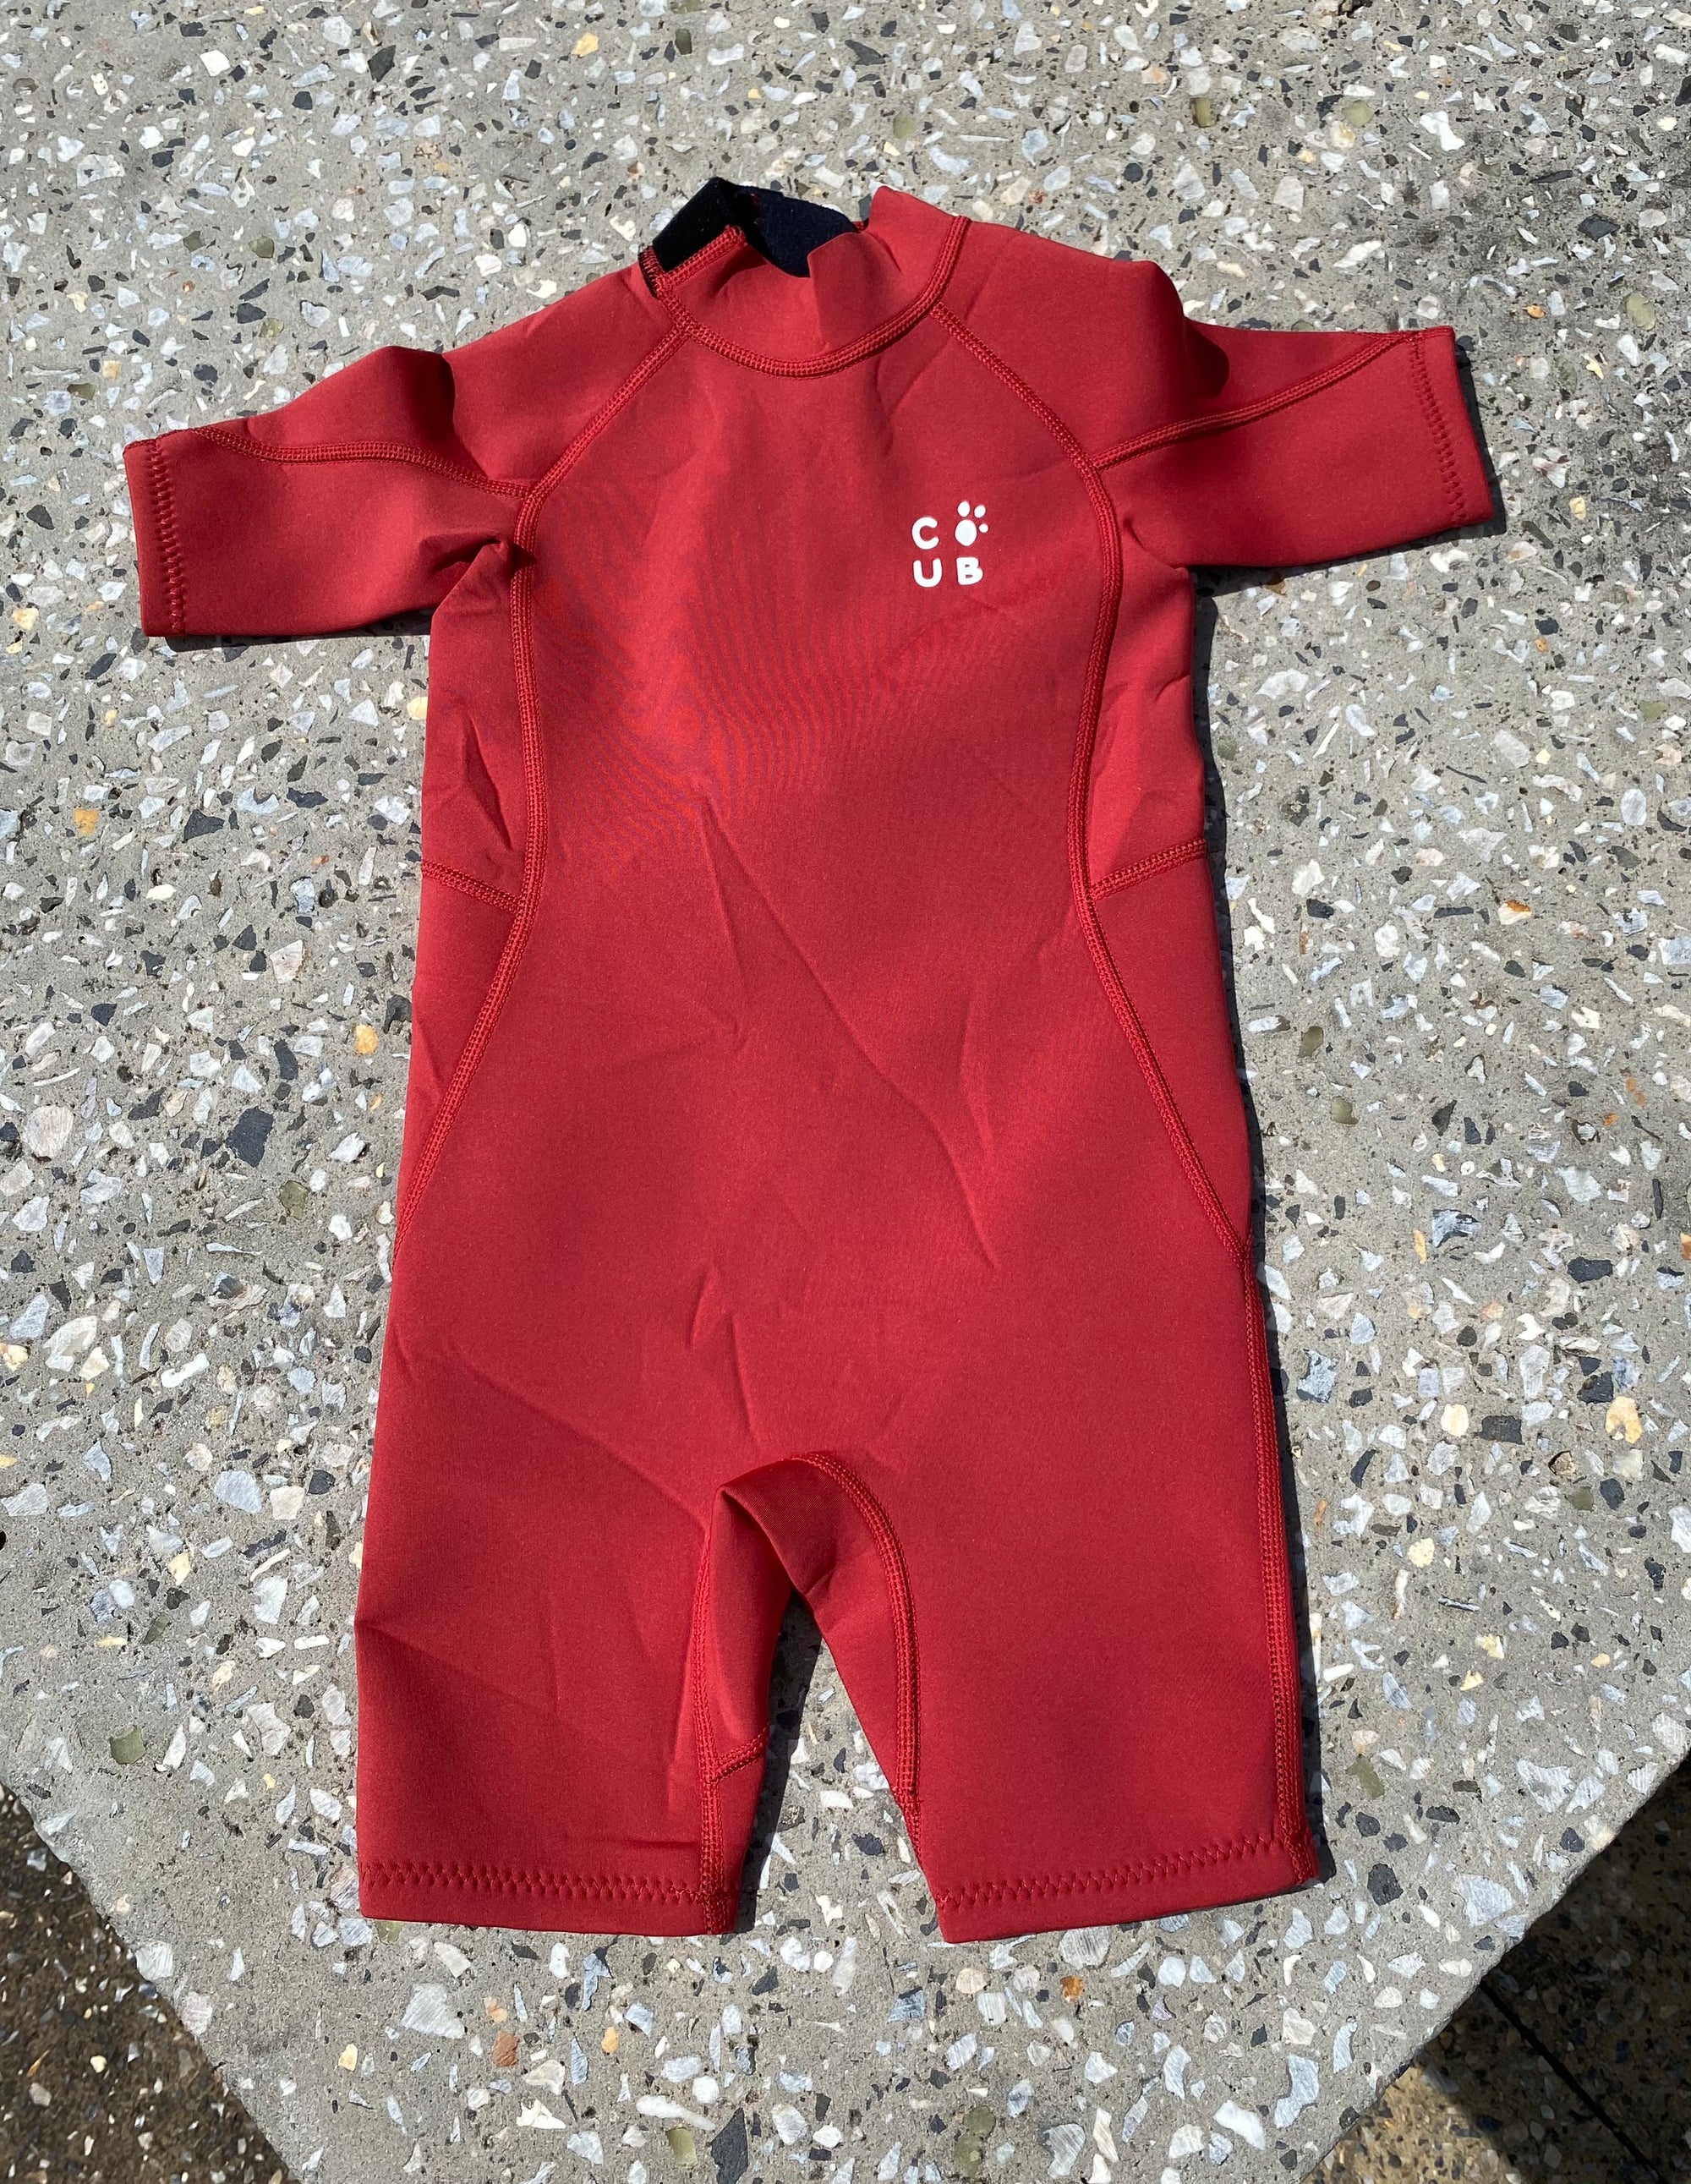 CUB / KIDS 1.5MM SPRING WETSUIT - Board Store CUBWetsuits  